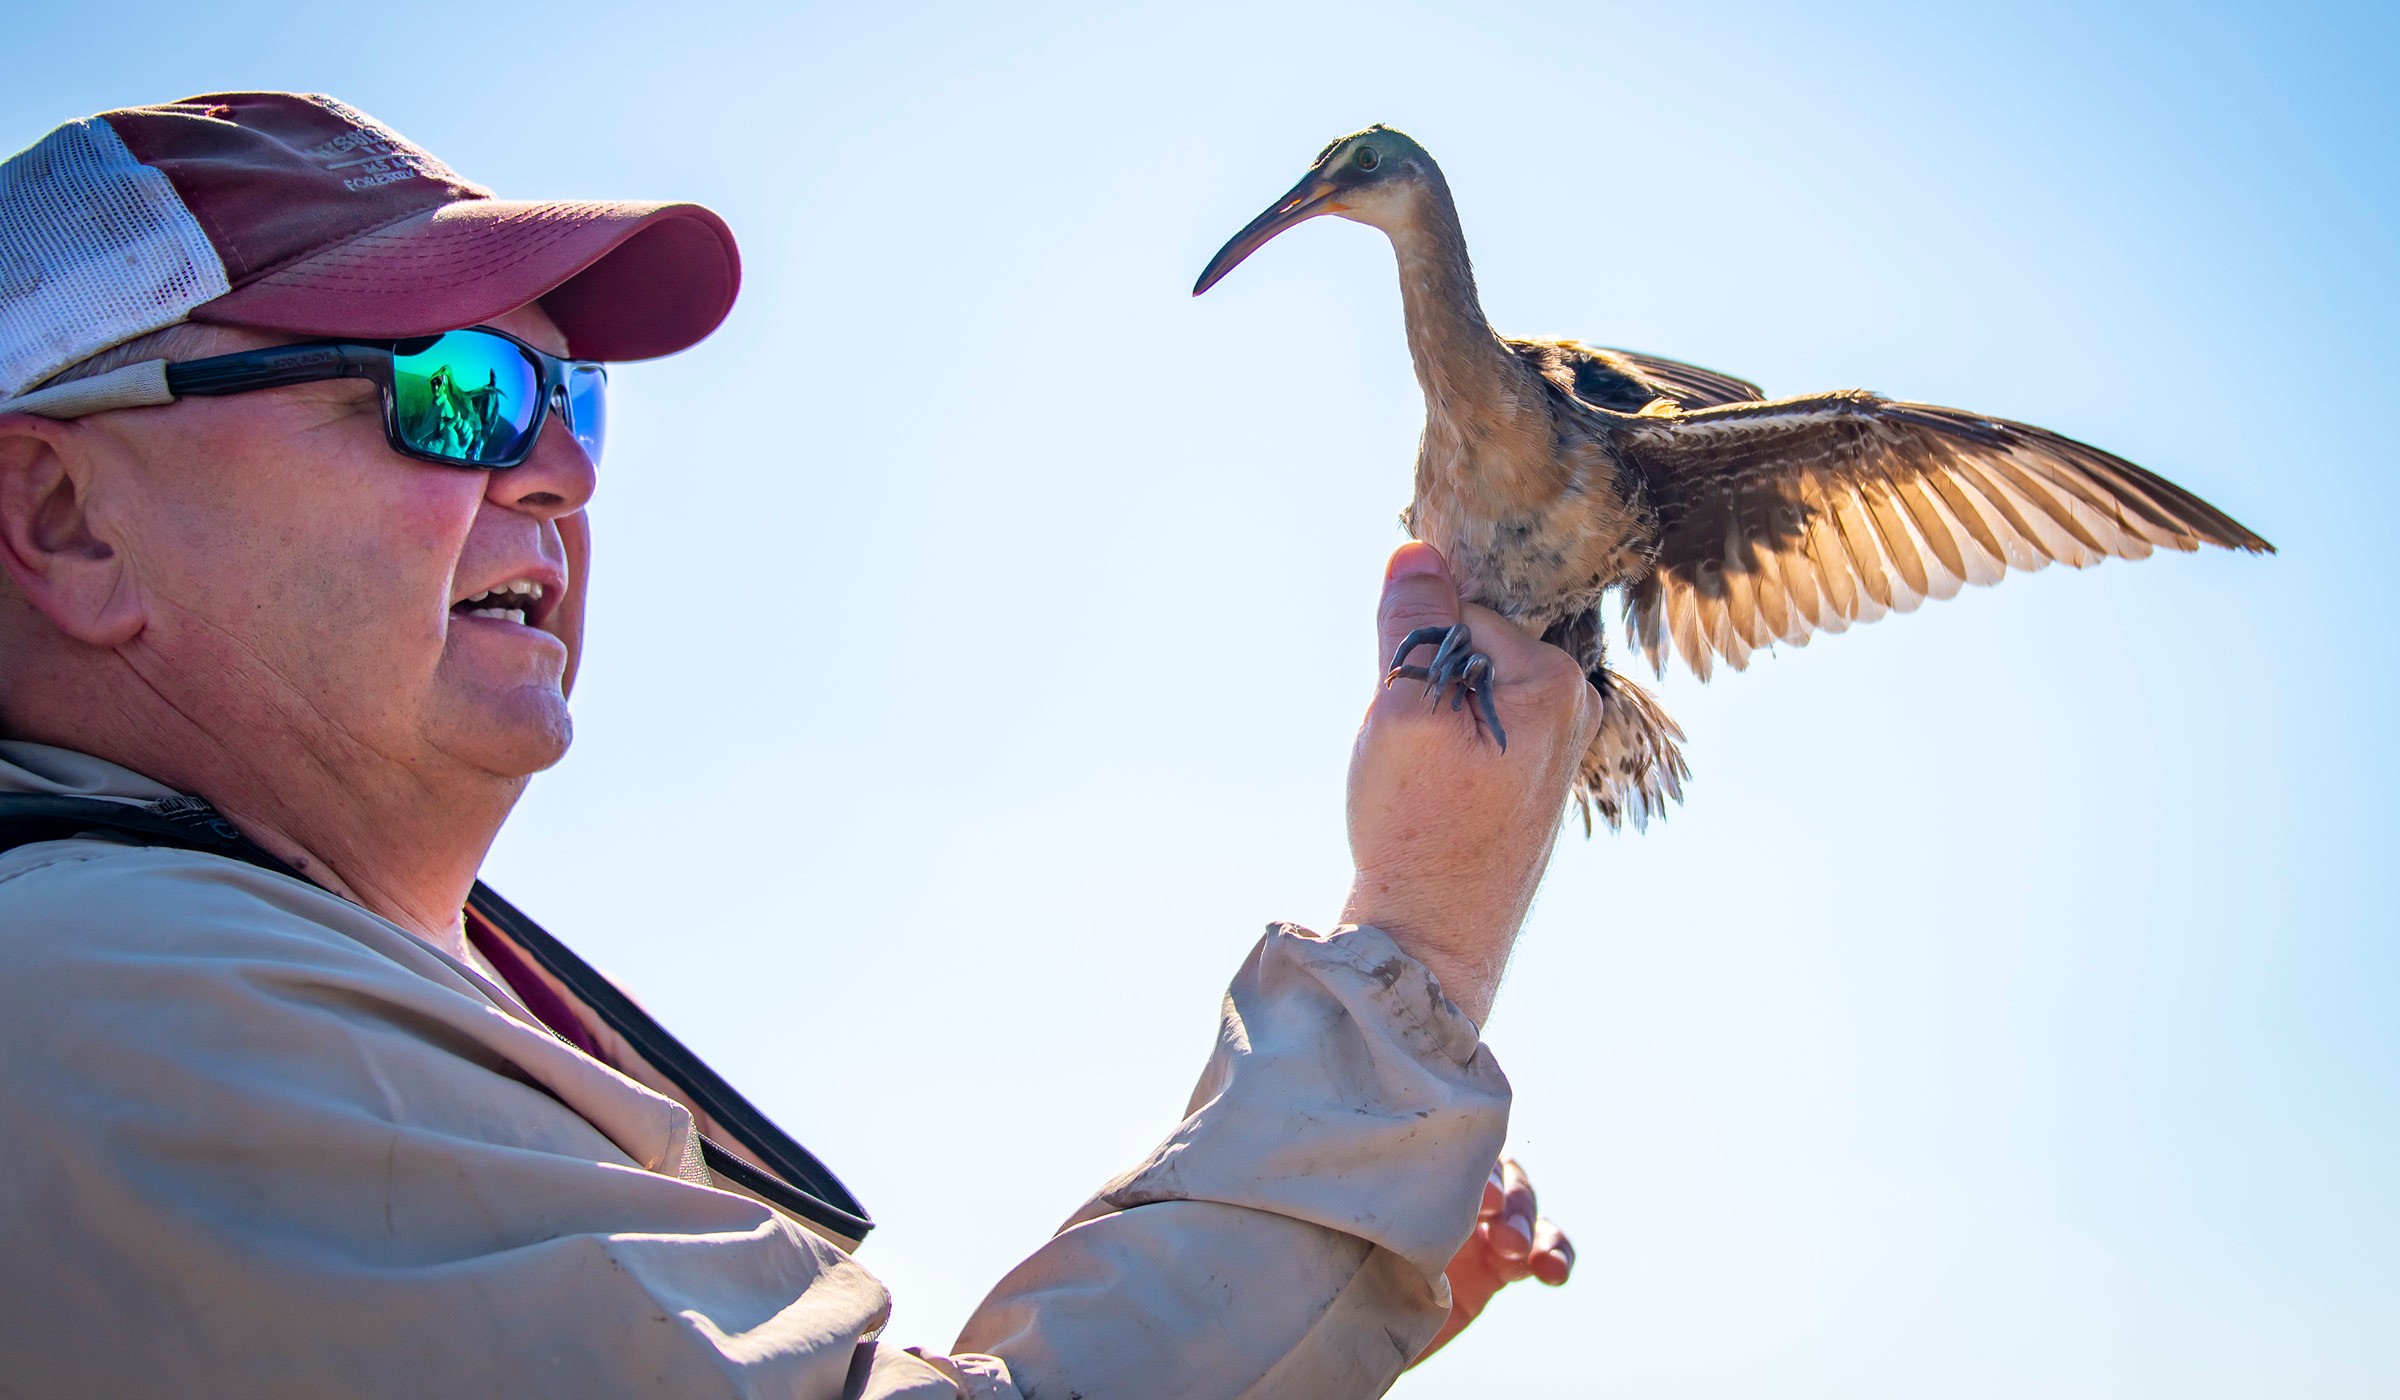 Mark Woodrey holds a bird in front of the bright blue sky